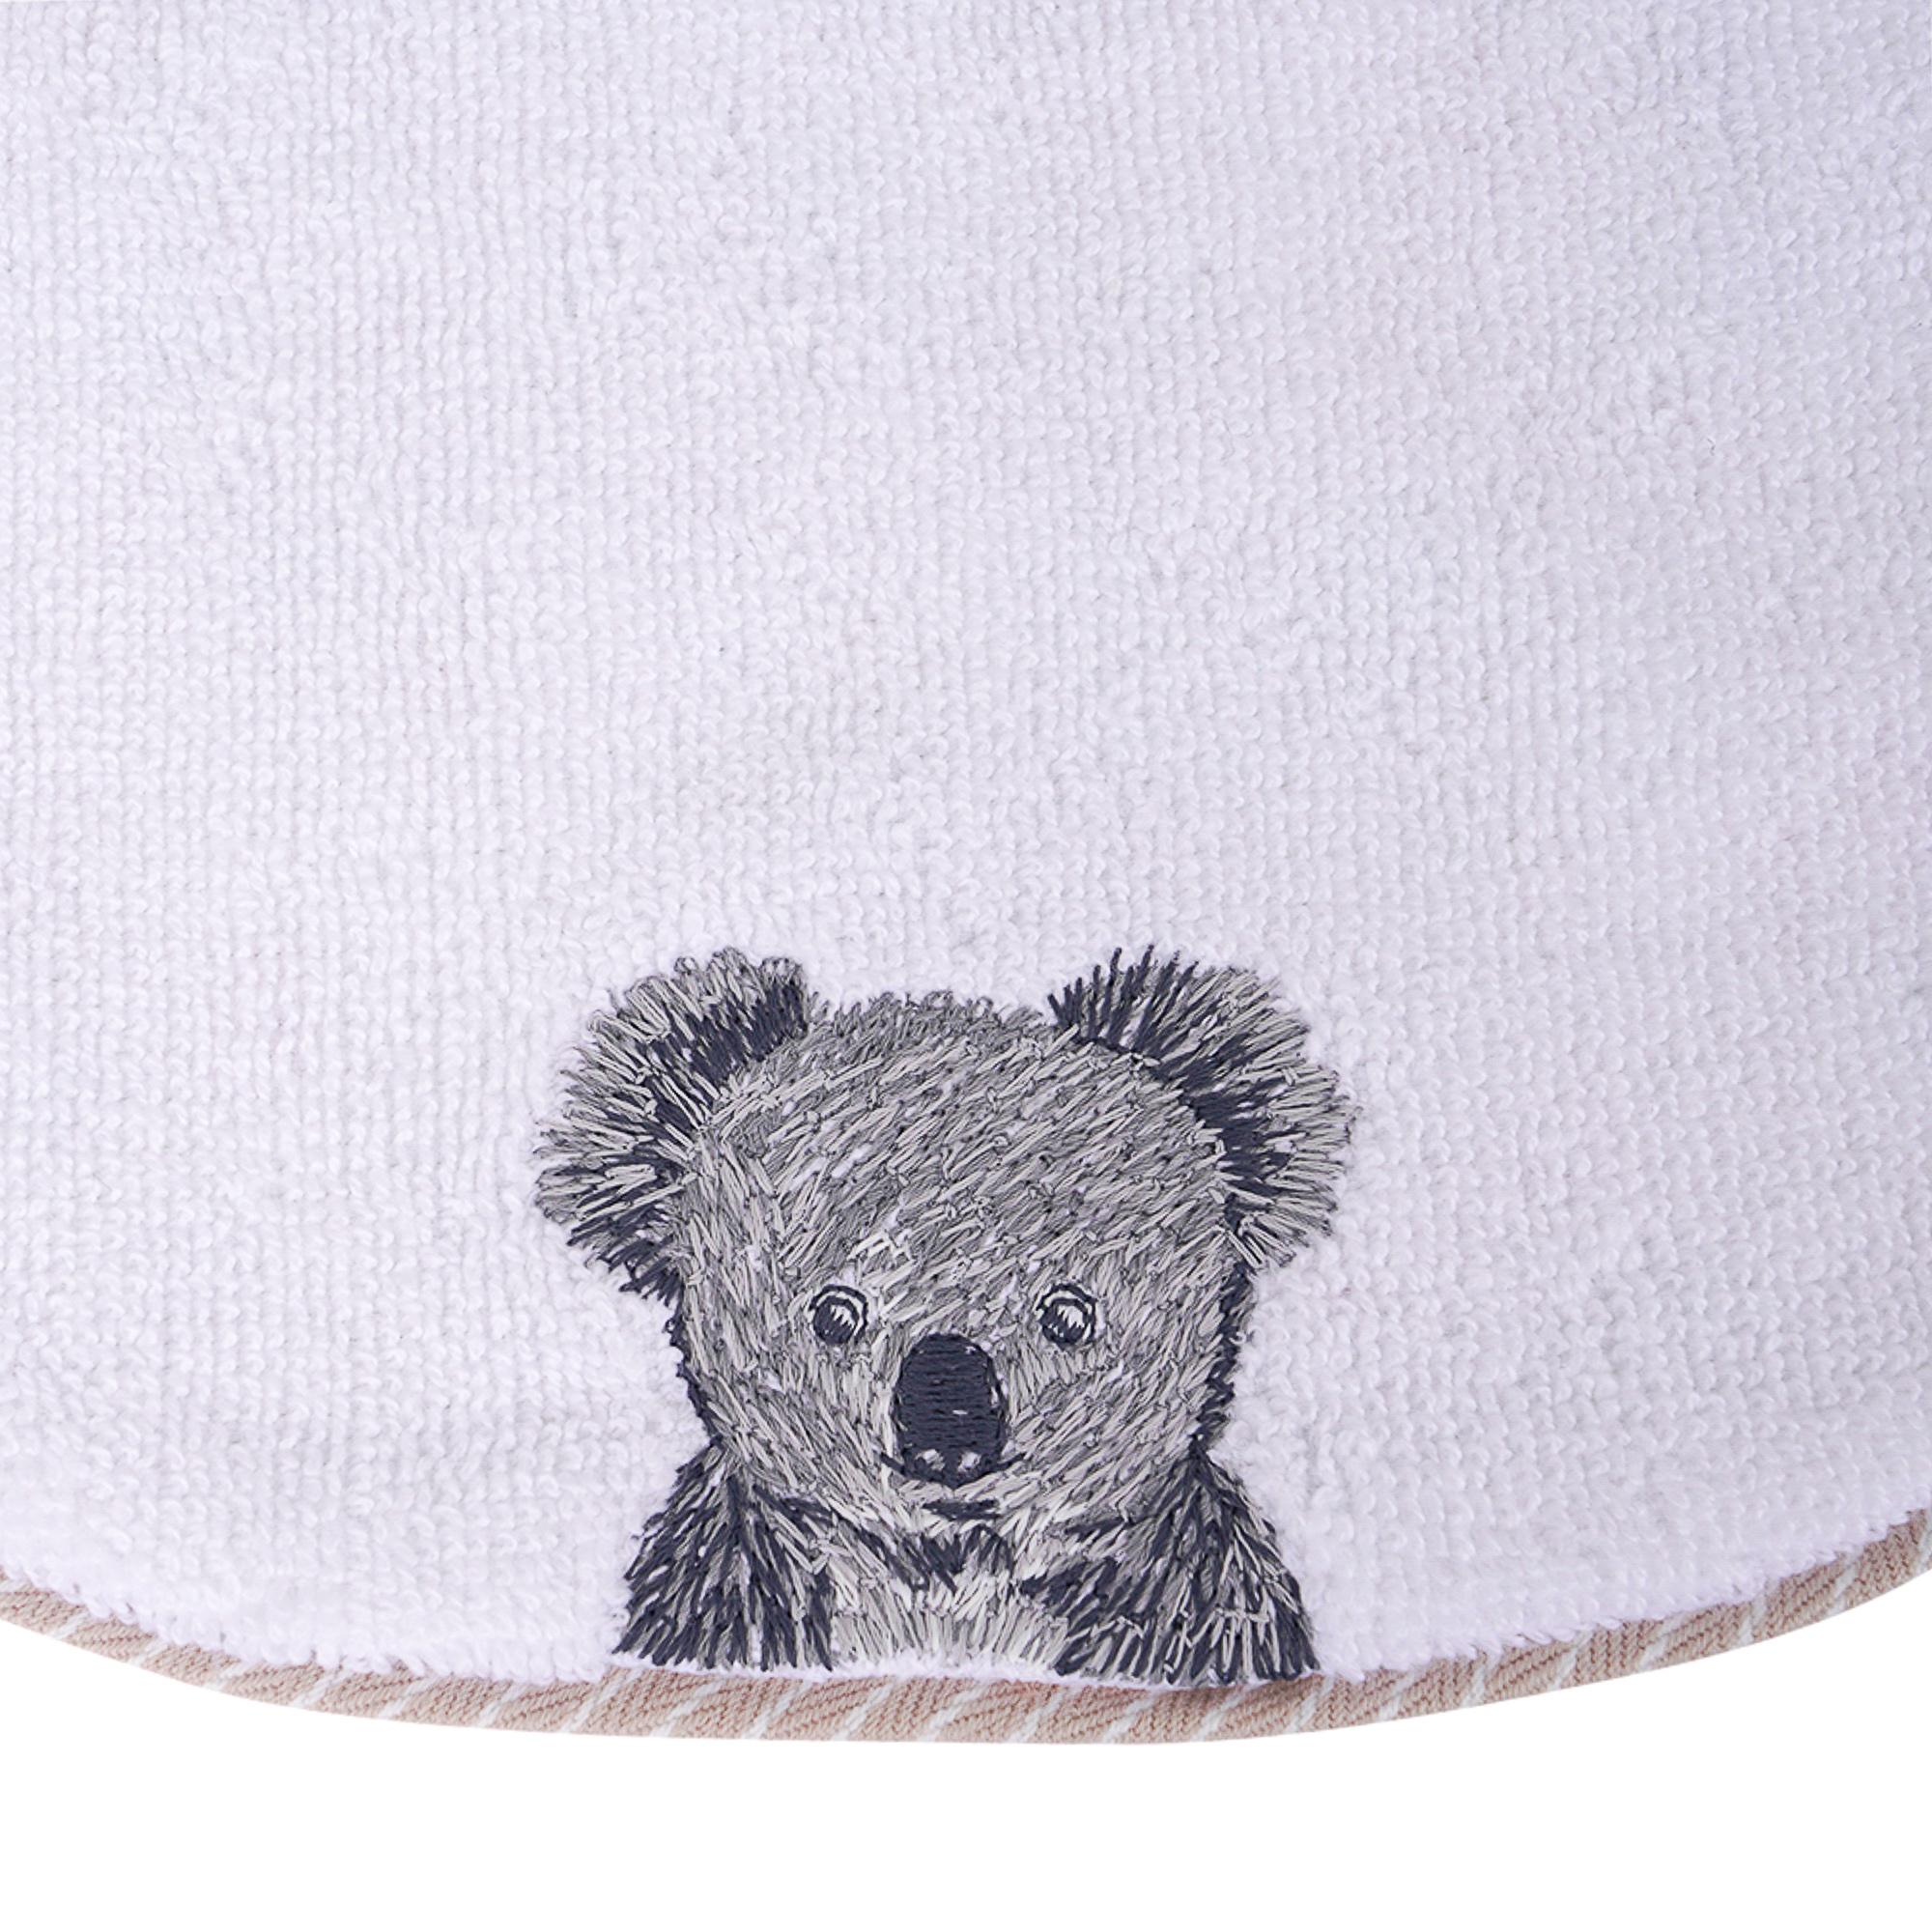 Mightychic offers an Hermes Passe-Passe Round Bib featured in Natural.
This charming bib has an embroidered Koala bear on front.
The rear  is white cotton with splashes of pretty colours.
Lovely gift idea.
Please see the matching washcloth